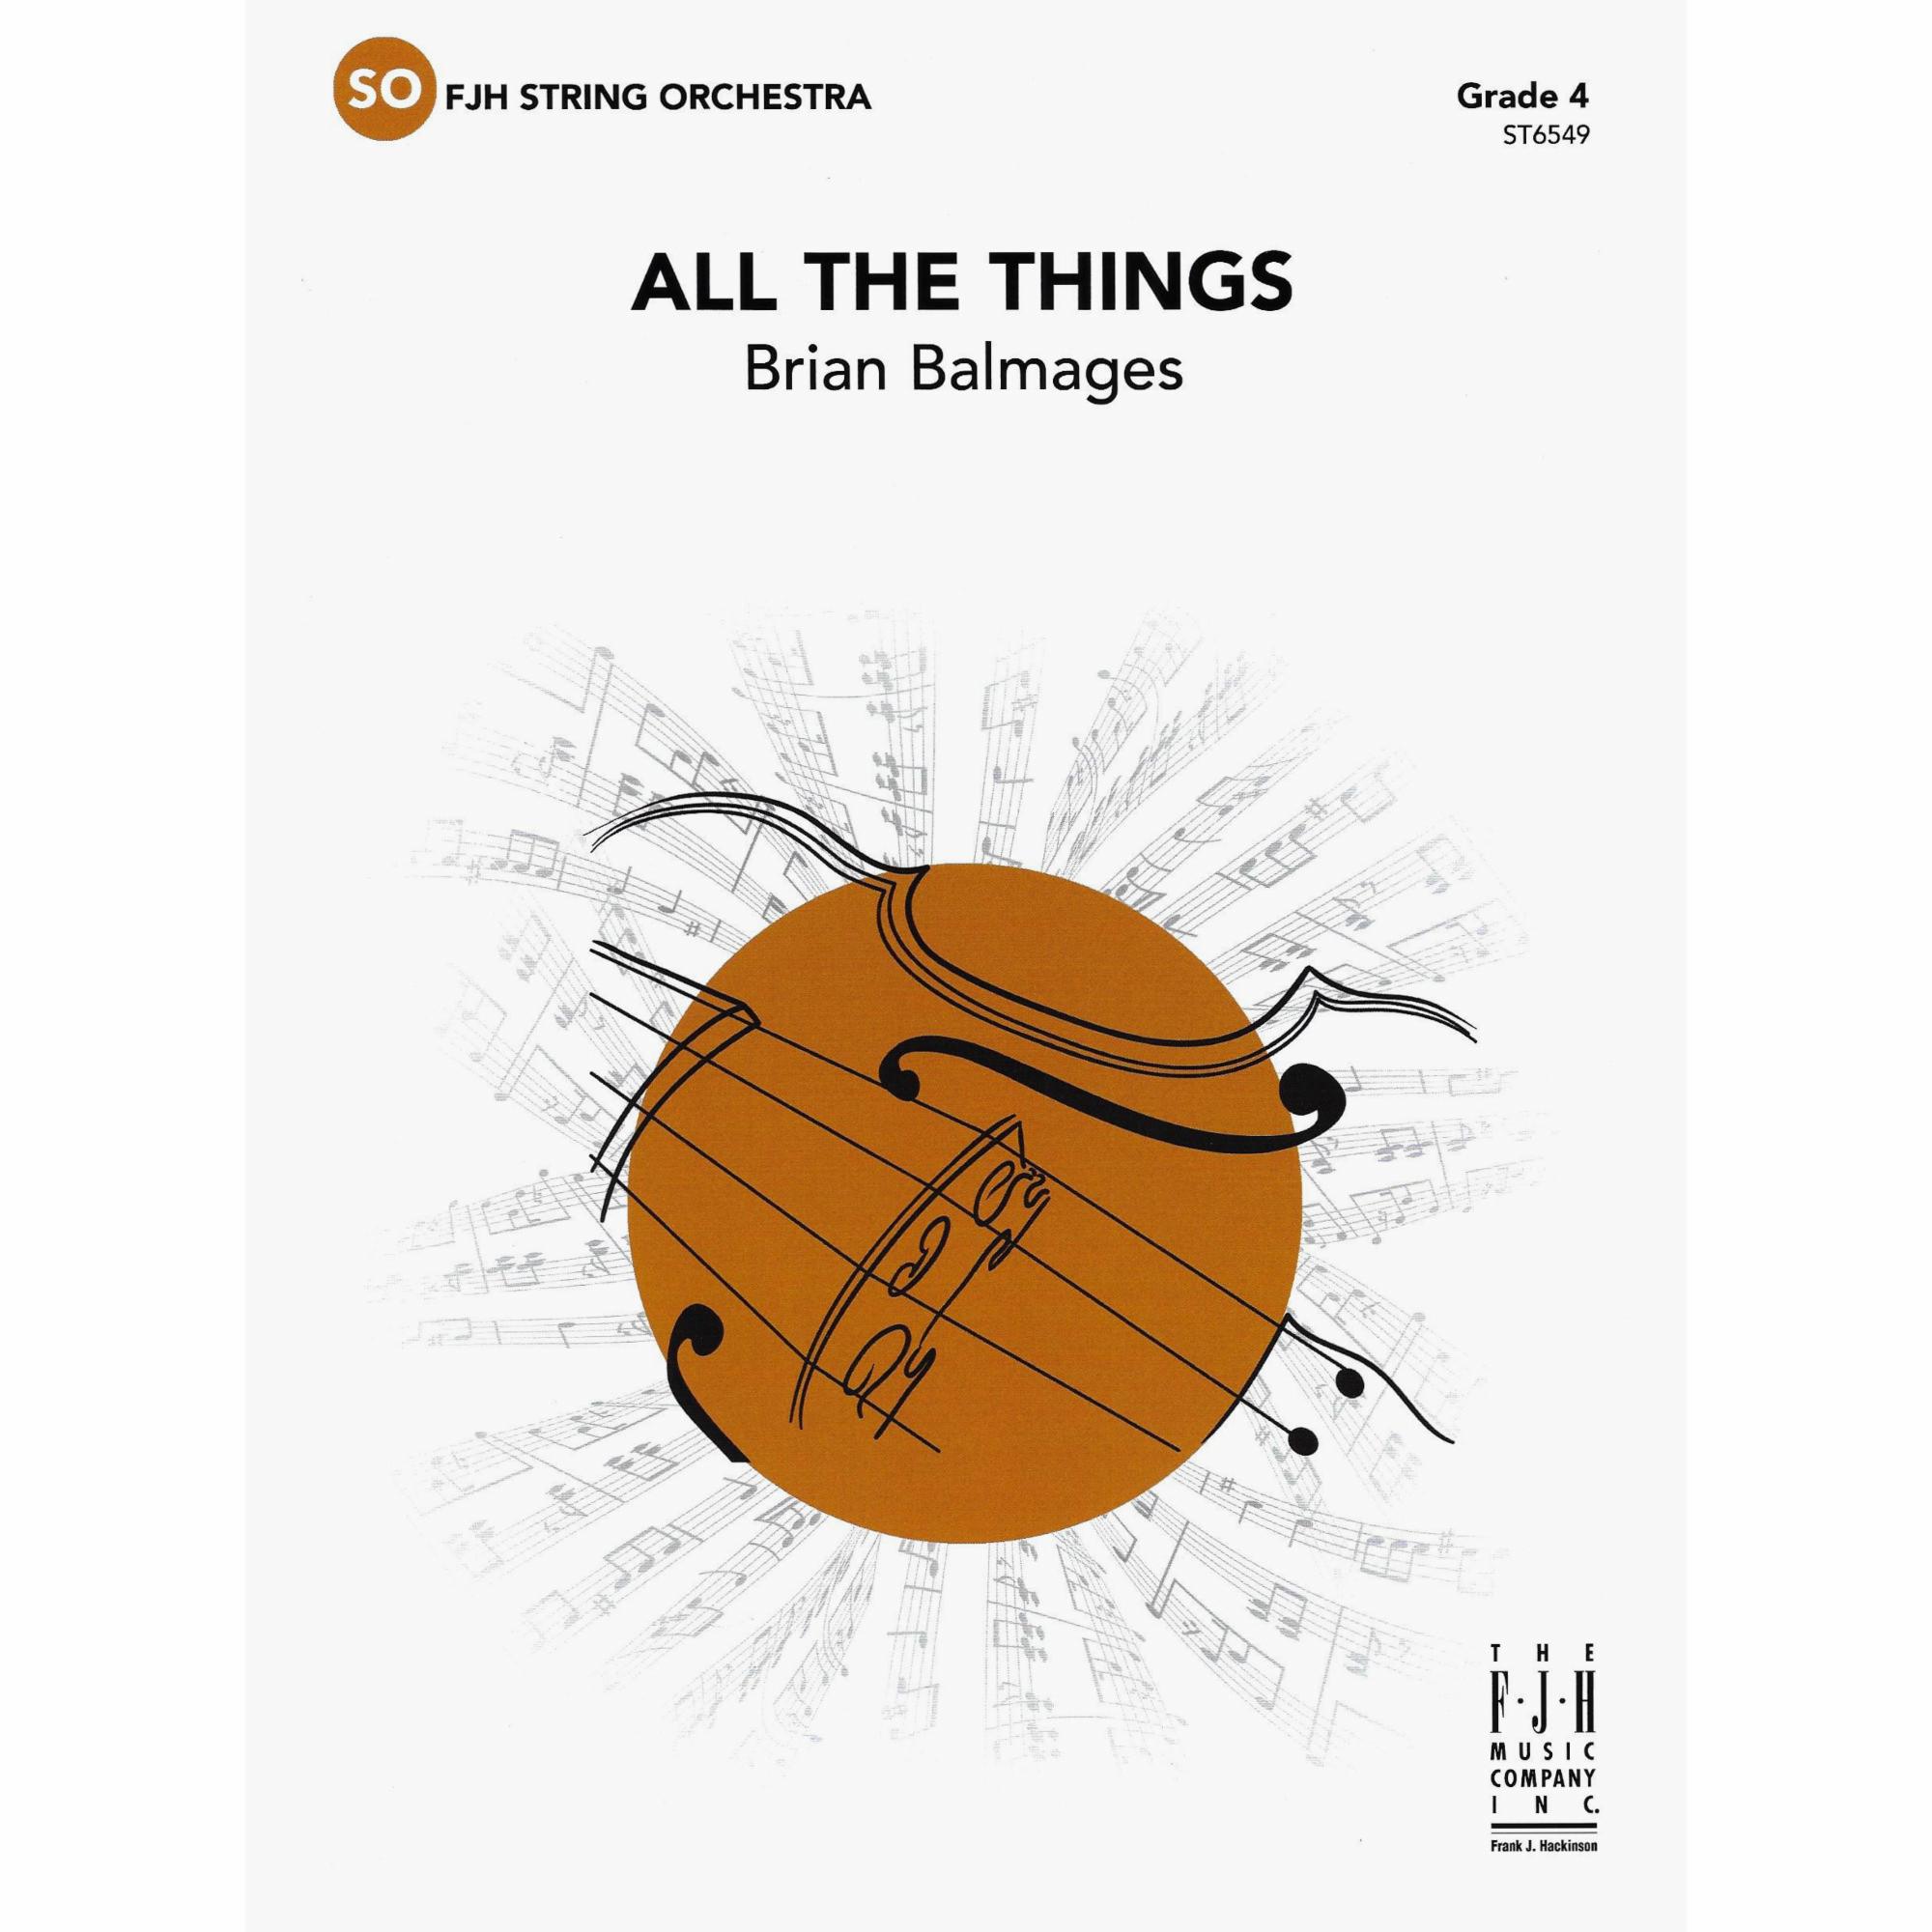 All the Things for String Orchestra